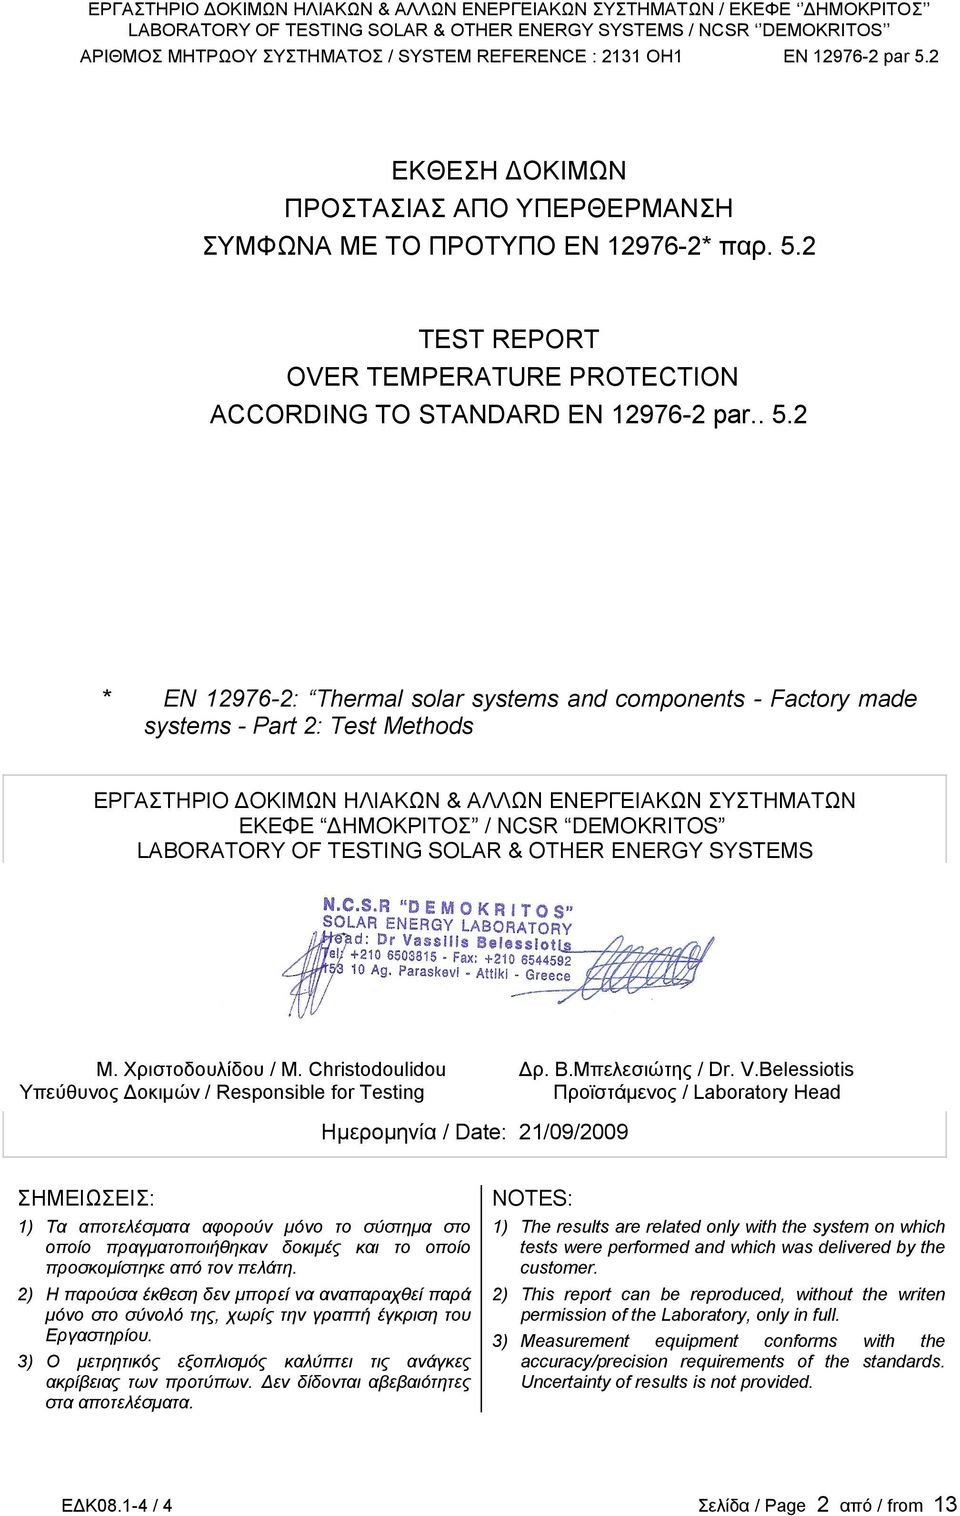 2 * EN 12976-2: Thermal solar systems and components - Factory made systems - Part 2: Test Methods ΕΡΓΑΣΤΗΡΙΟ ΔΟΚΙΜΩΝ ΗΛΙΑΚΩΝ & ΑΛΛΩΝ ΕΝΕΡΓΕΙΑΚΩΝ ΣΥΣΤΗΜΑΤΩΝ ΕΚΕΦΕ ΔΗΜΟΚΡΙΤΟΣ / NCSR DEMOKRITOS